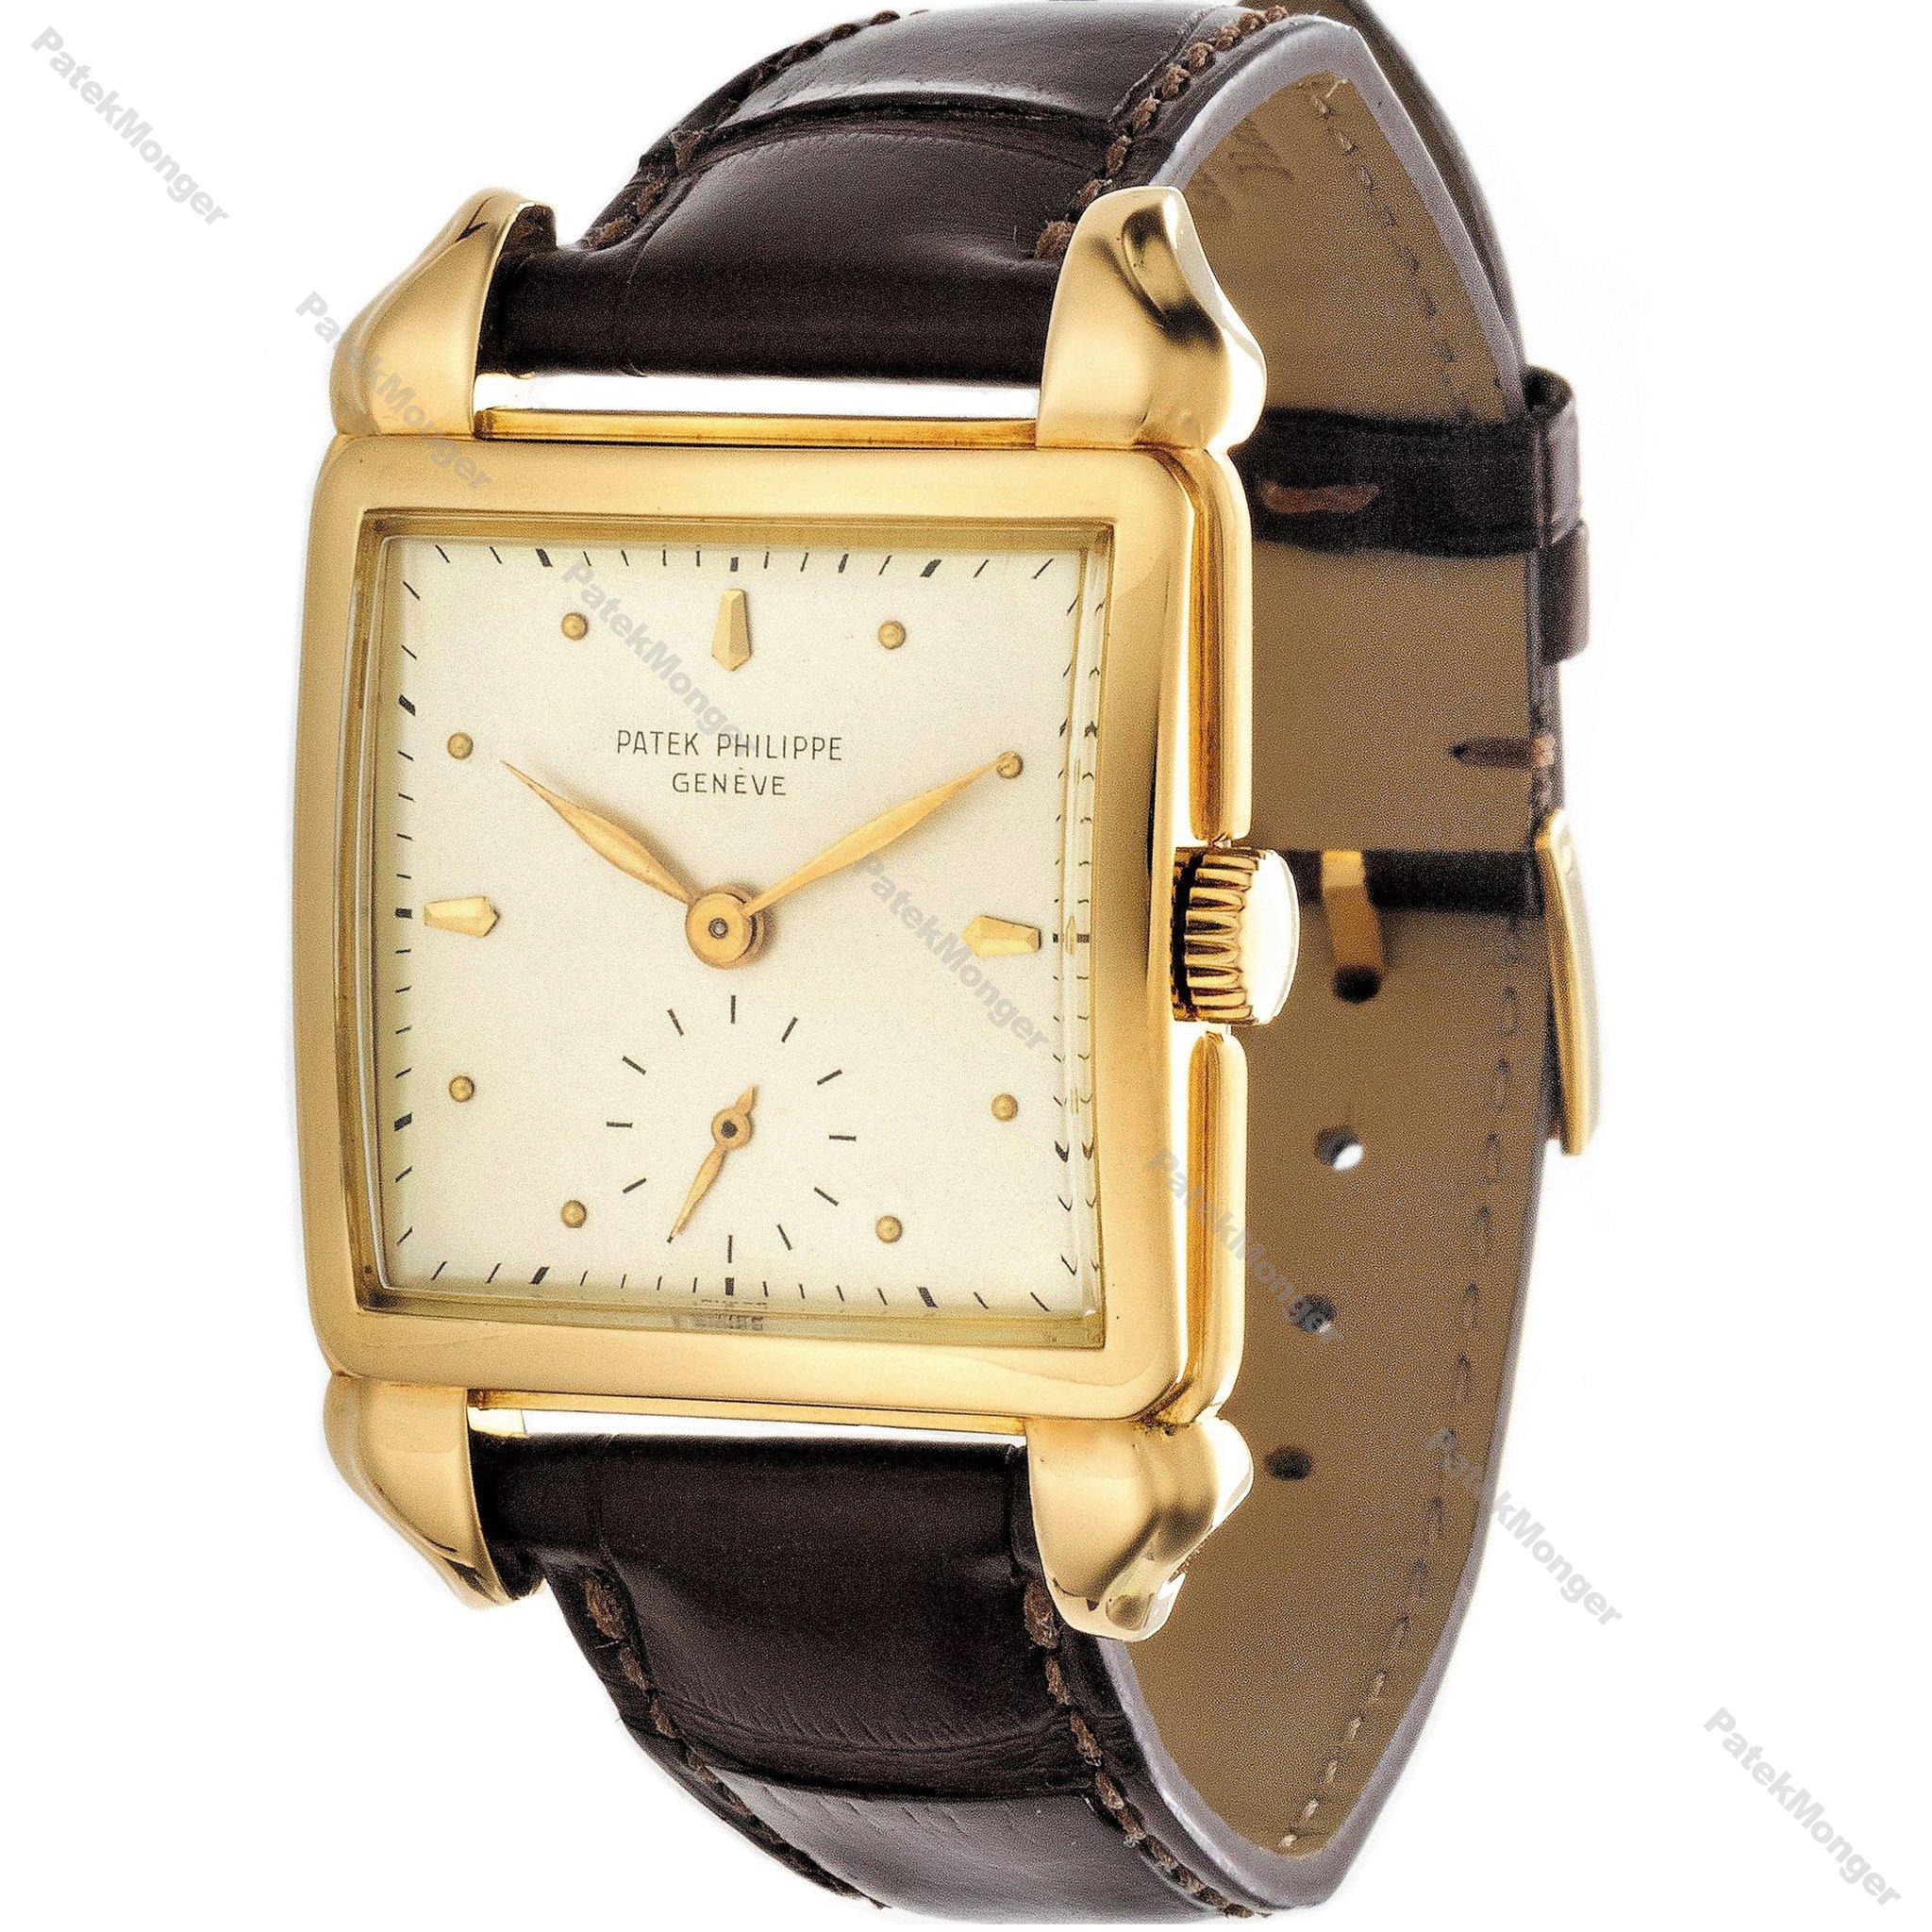 Introduction:
This Patek Philippe 2424J vintage Over Size Watch has an 18K Yellow Gold oversized 44 x 30 mm square case with 